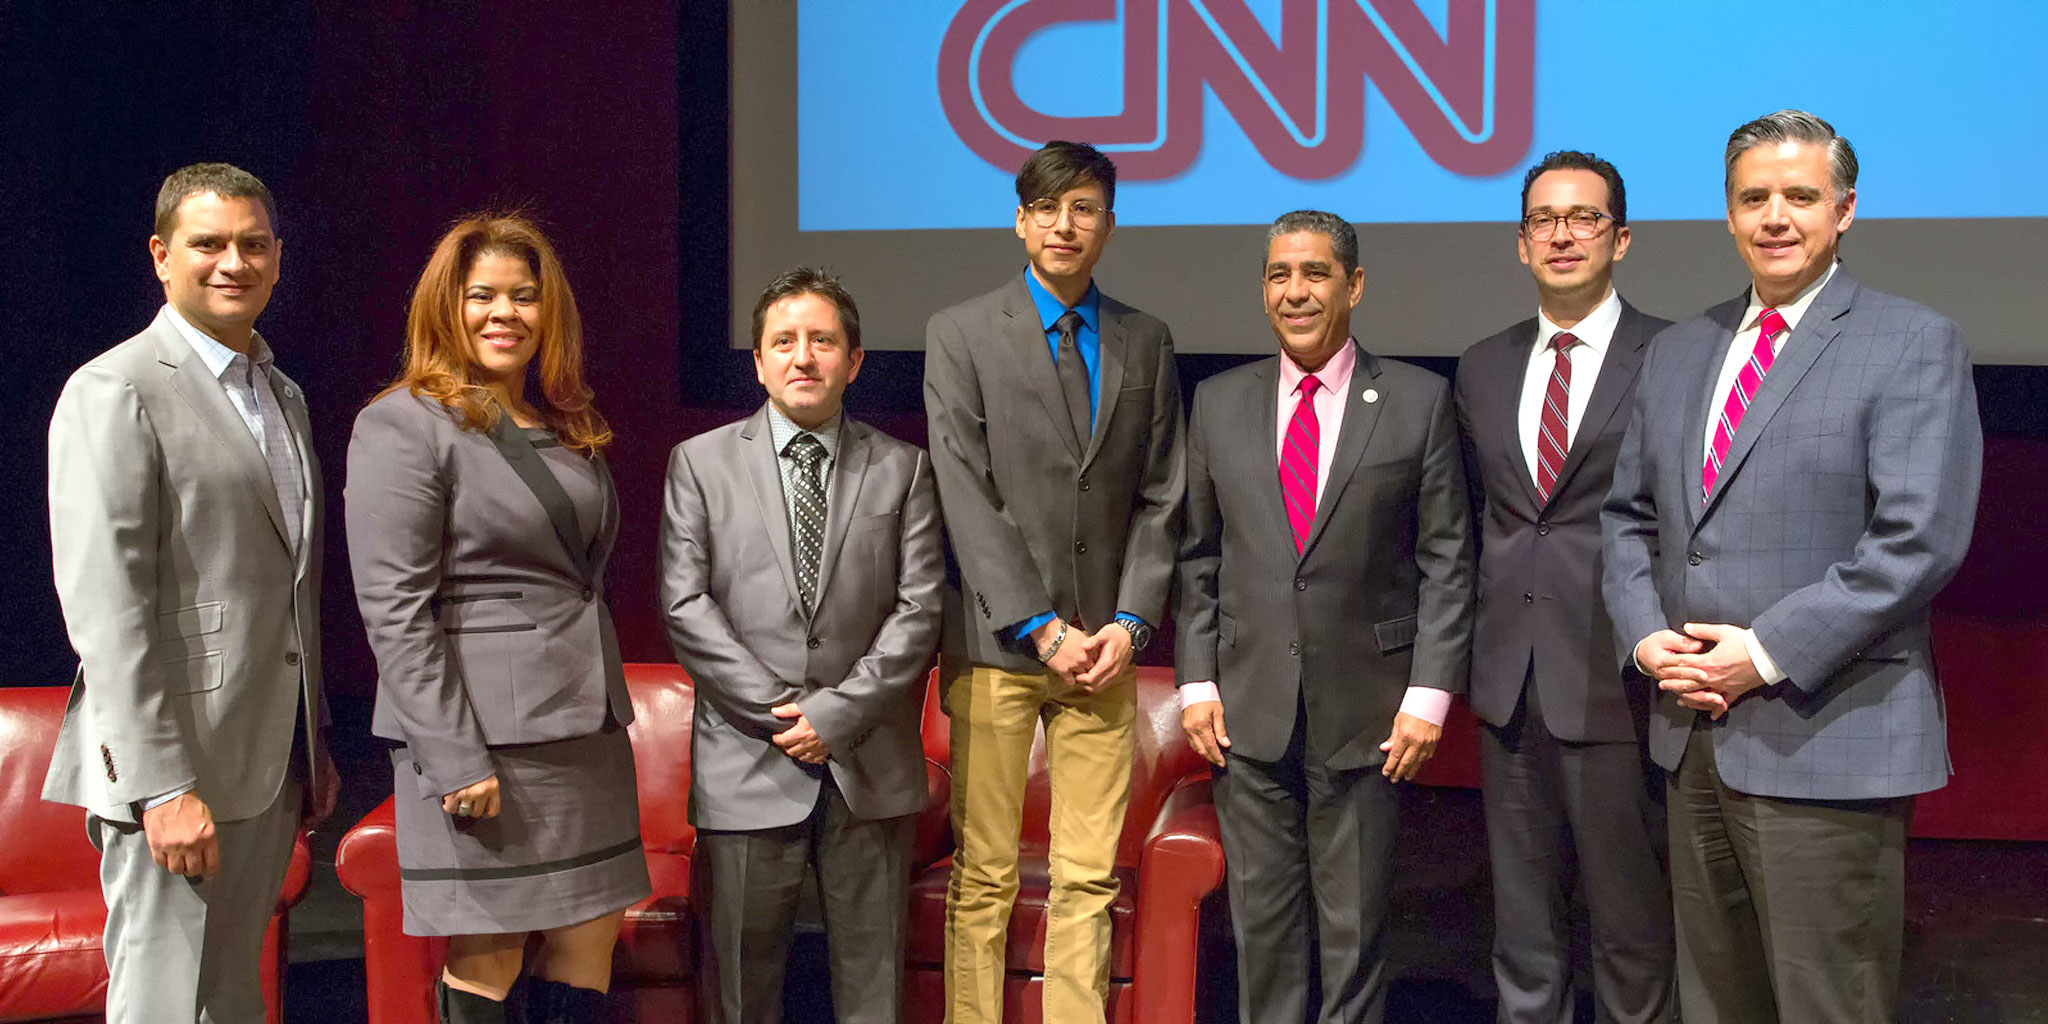 CNN en Español Screens Documentary at Lehman College that Chronicles the Struggle of Undocumented Immigrants in the U.S.